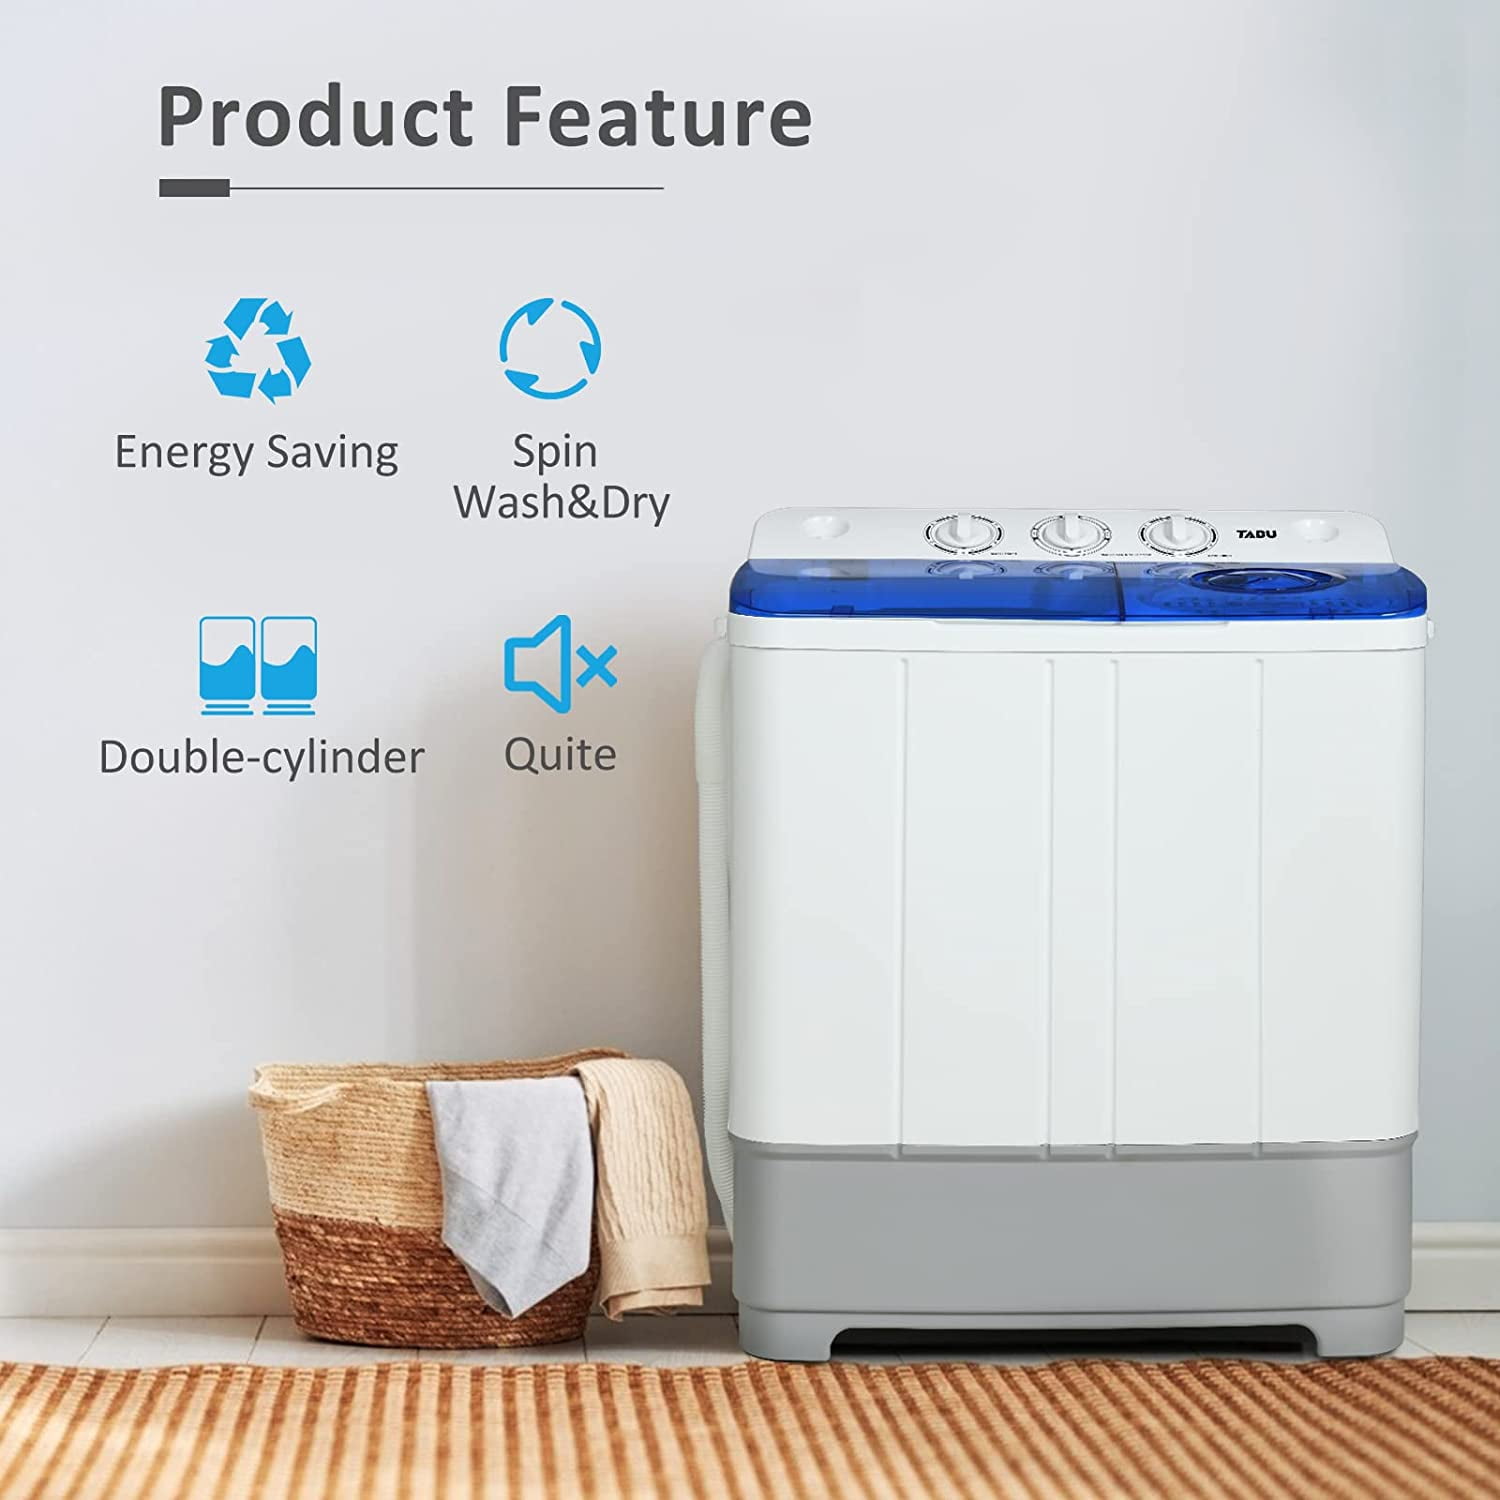 TABU High Efficiency Portable Washer in Blue & Reviews